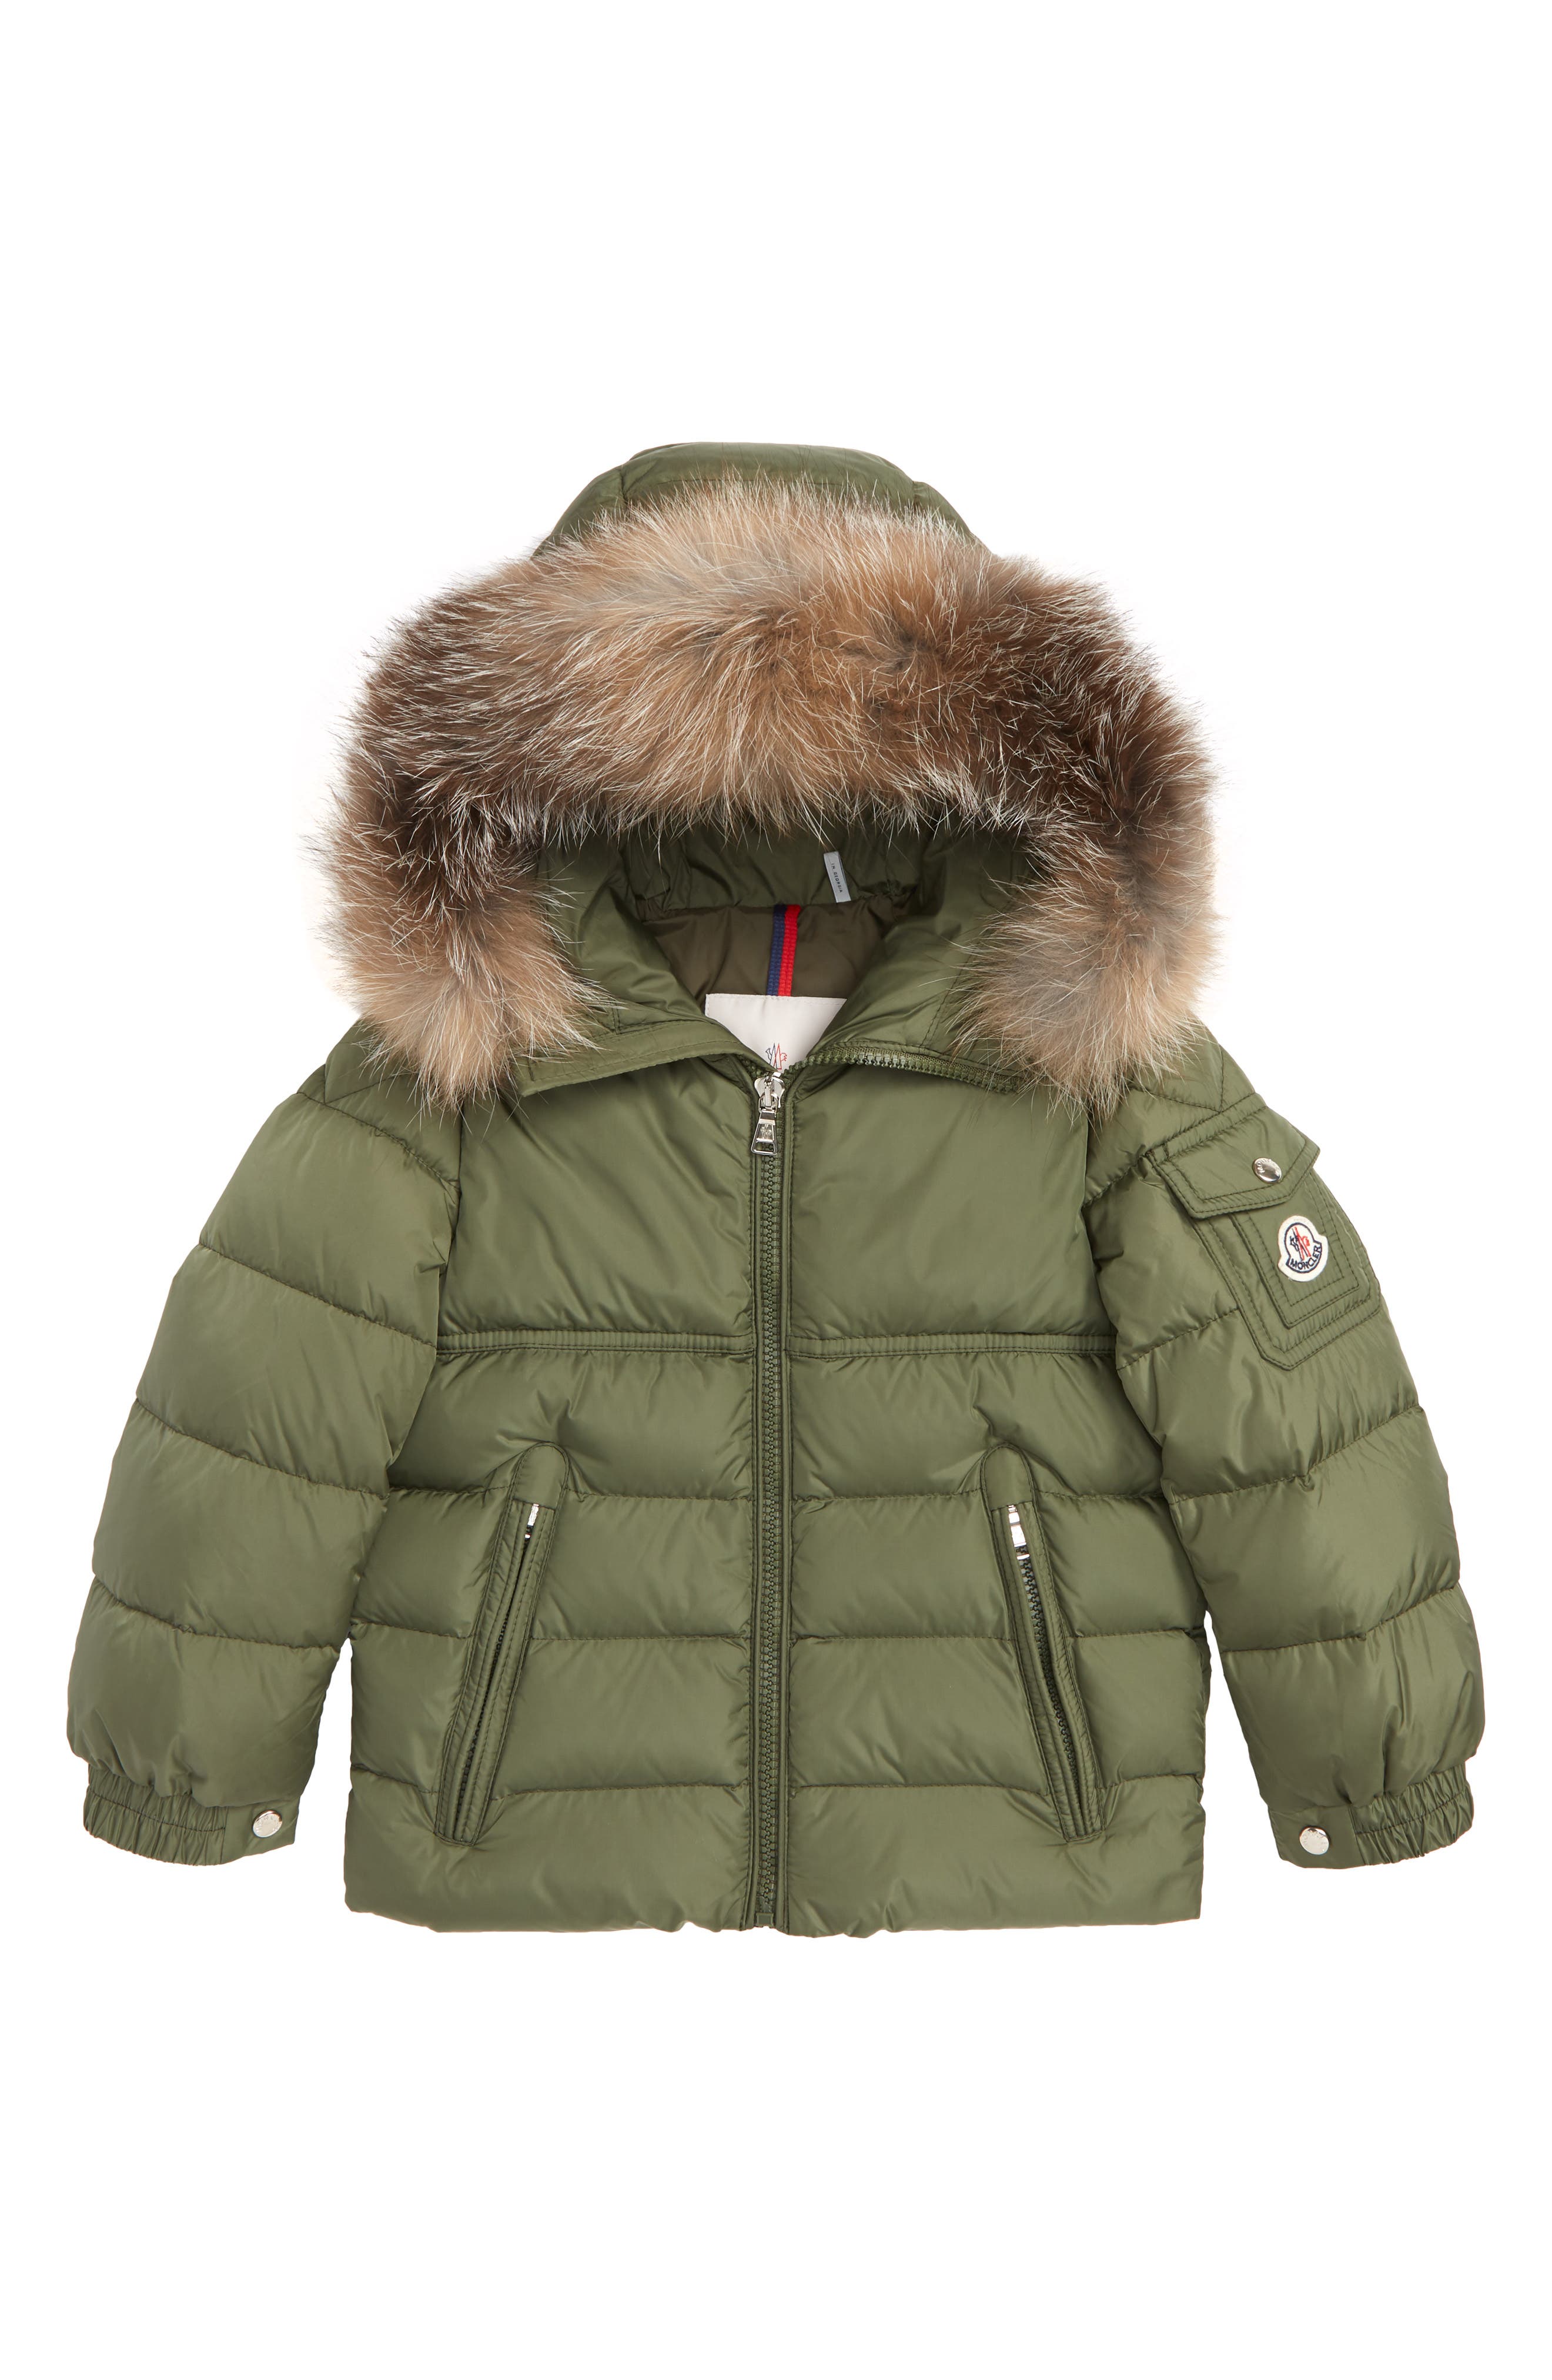 moncler coat pay monthly